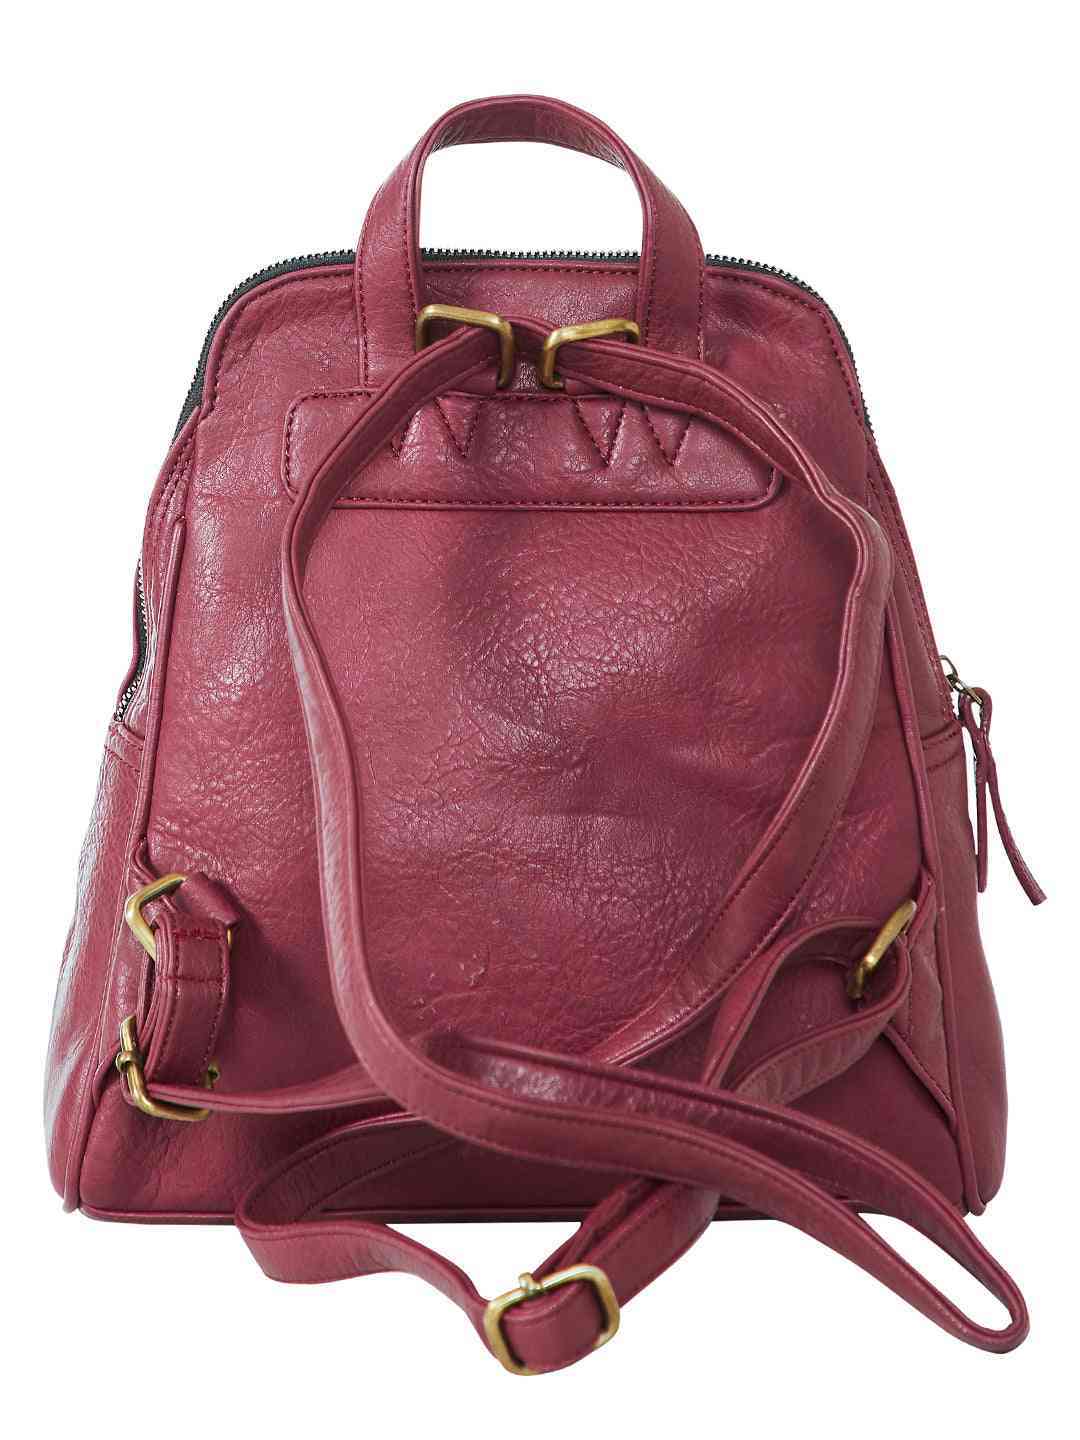 Mona-B Bag Mona B Convertible Backpack for Offices Schools and Colleges with Stylish Design for Women: Grace (MLT)- (SH-110 MLT	)